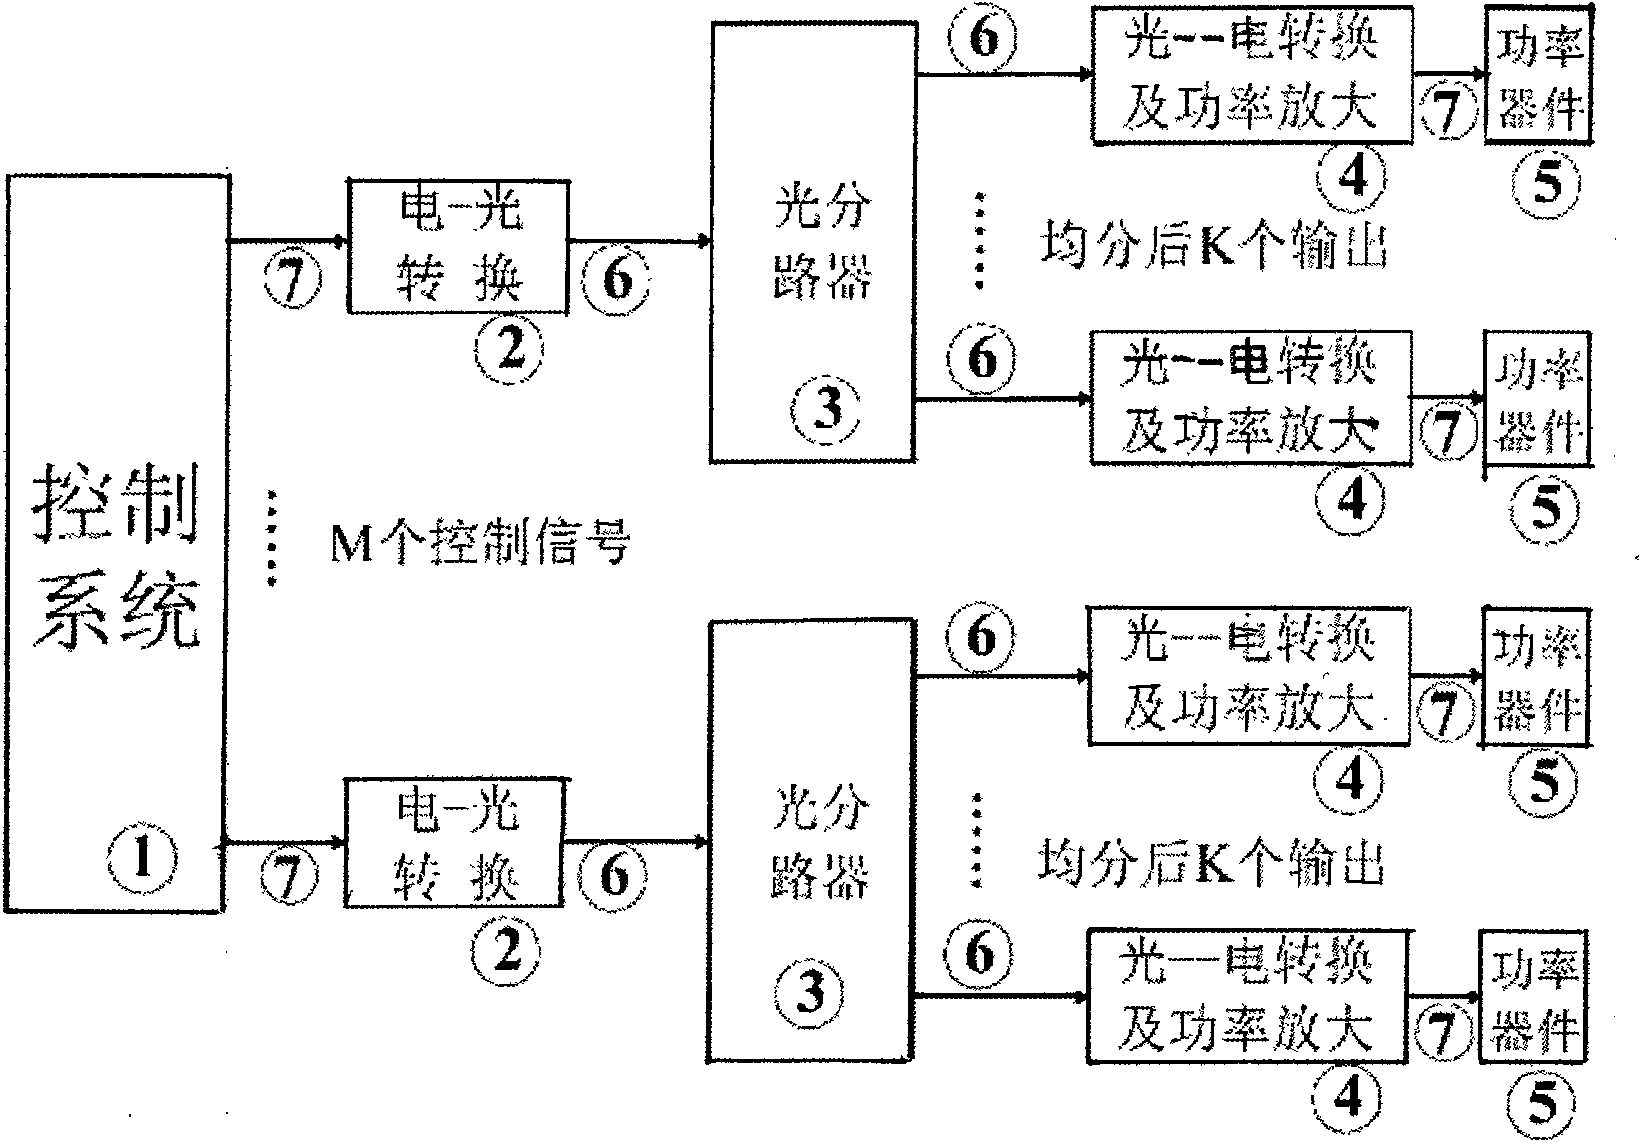 Redundancy-synchronization-isolation control method for parallel connection or serial connection of power devices